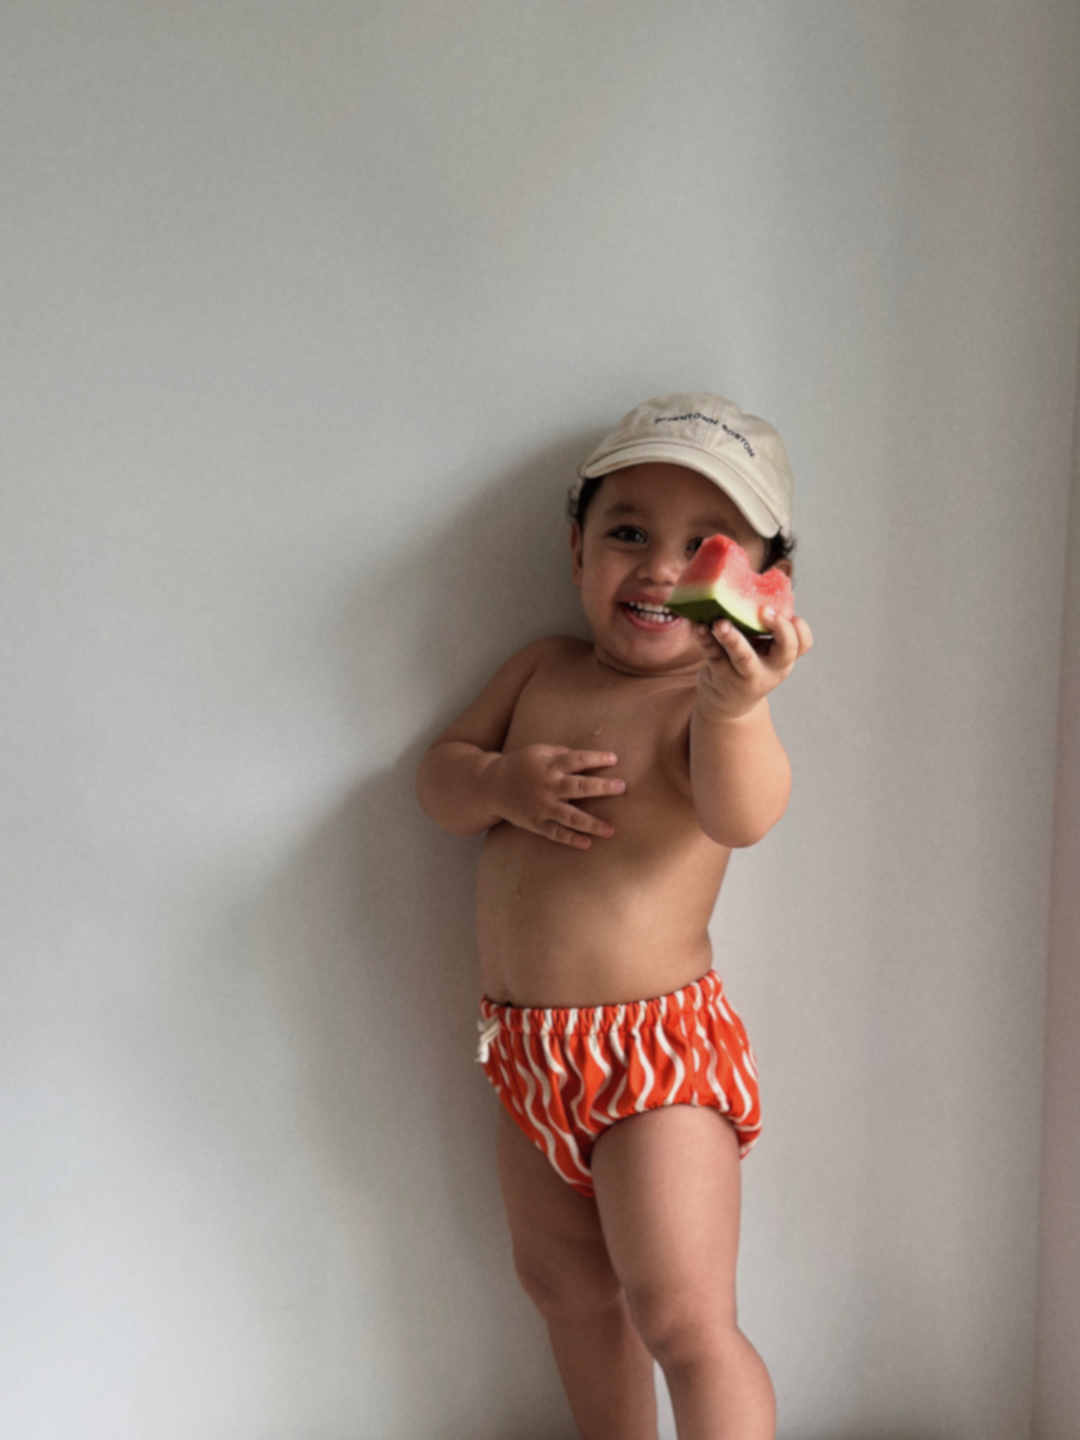 Spaghetti | The front view of the swim diaper with an elastic waist with a tie and elastic leg holes on a child standing up. The diaper is a bright orange with wavy and vertical cream colored lines.